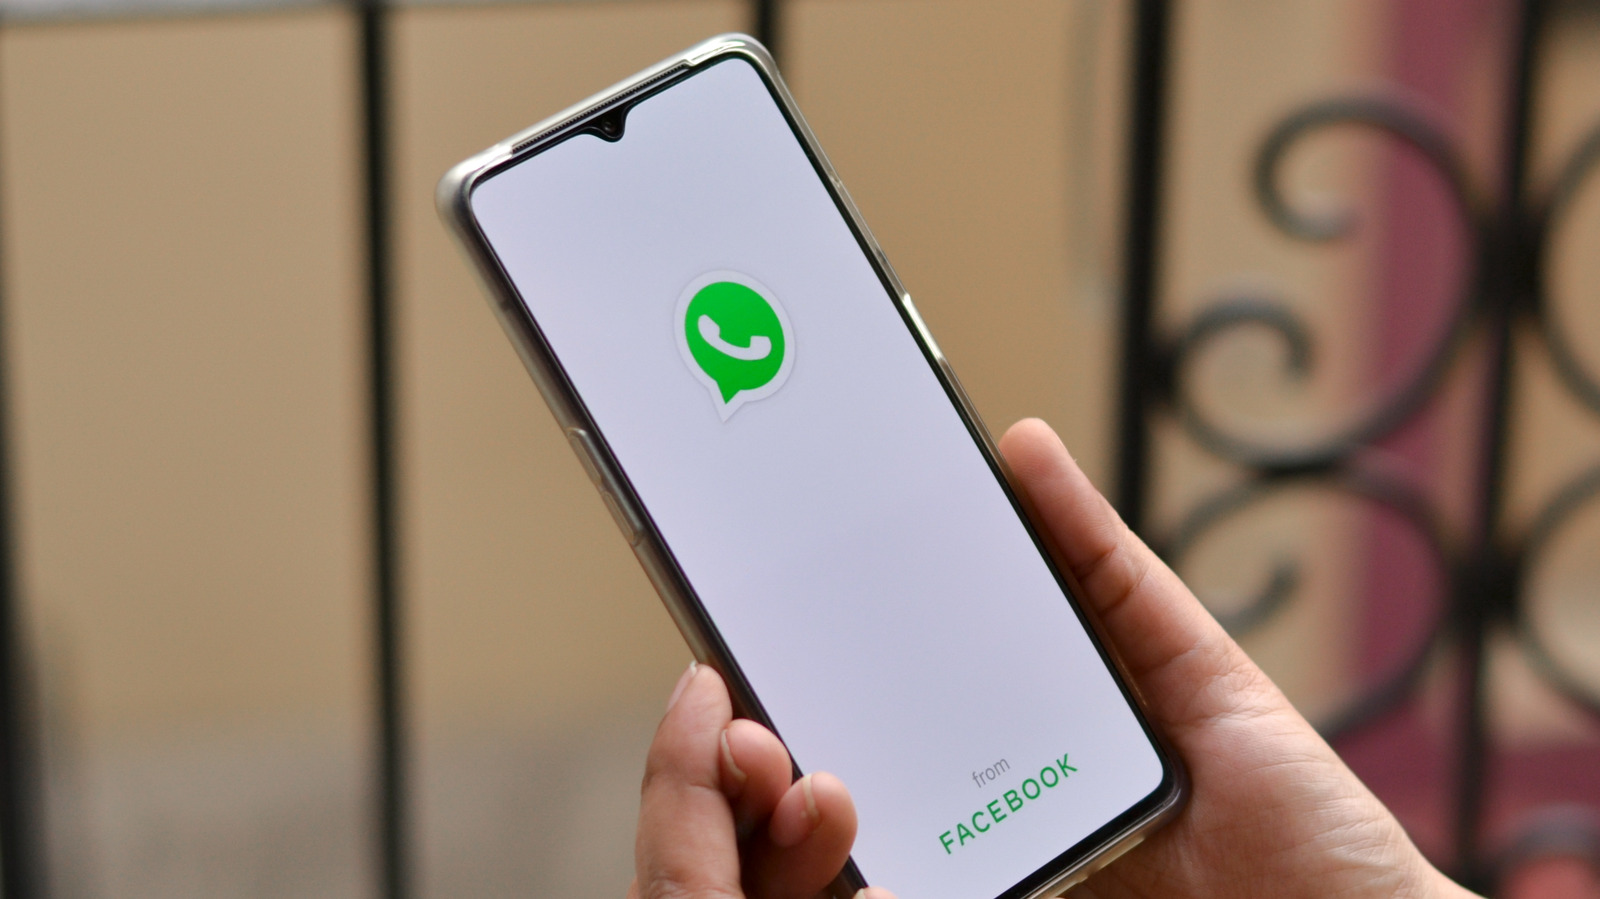 WhatsApp launched a big change to media visibility